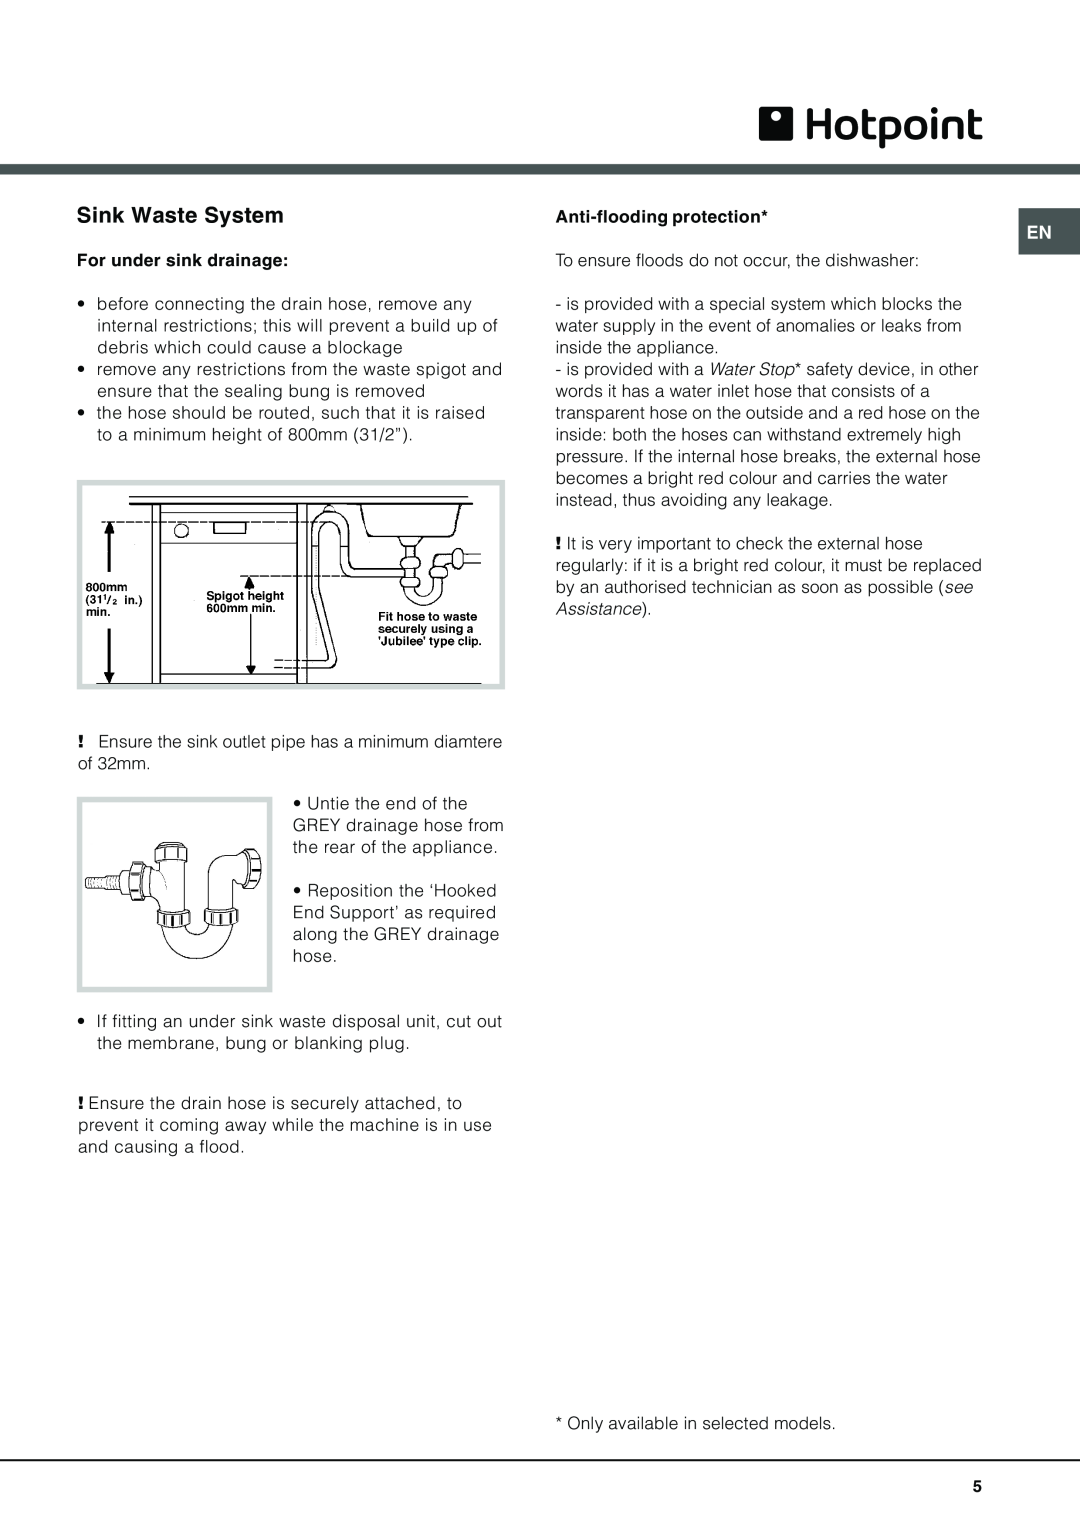 Hotpoint BFI 670 manual Sink Waste System, For under sink drainage, Anti-floodingprotection 